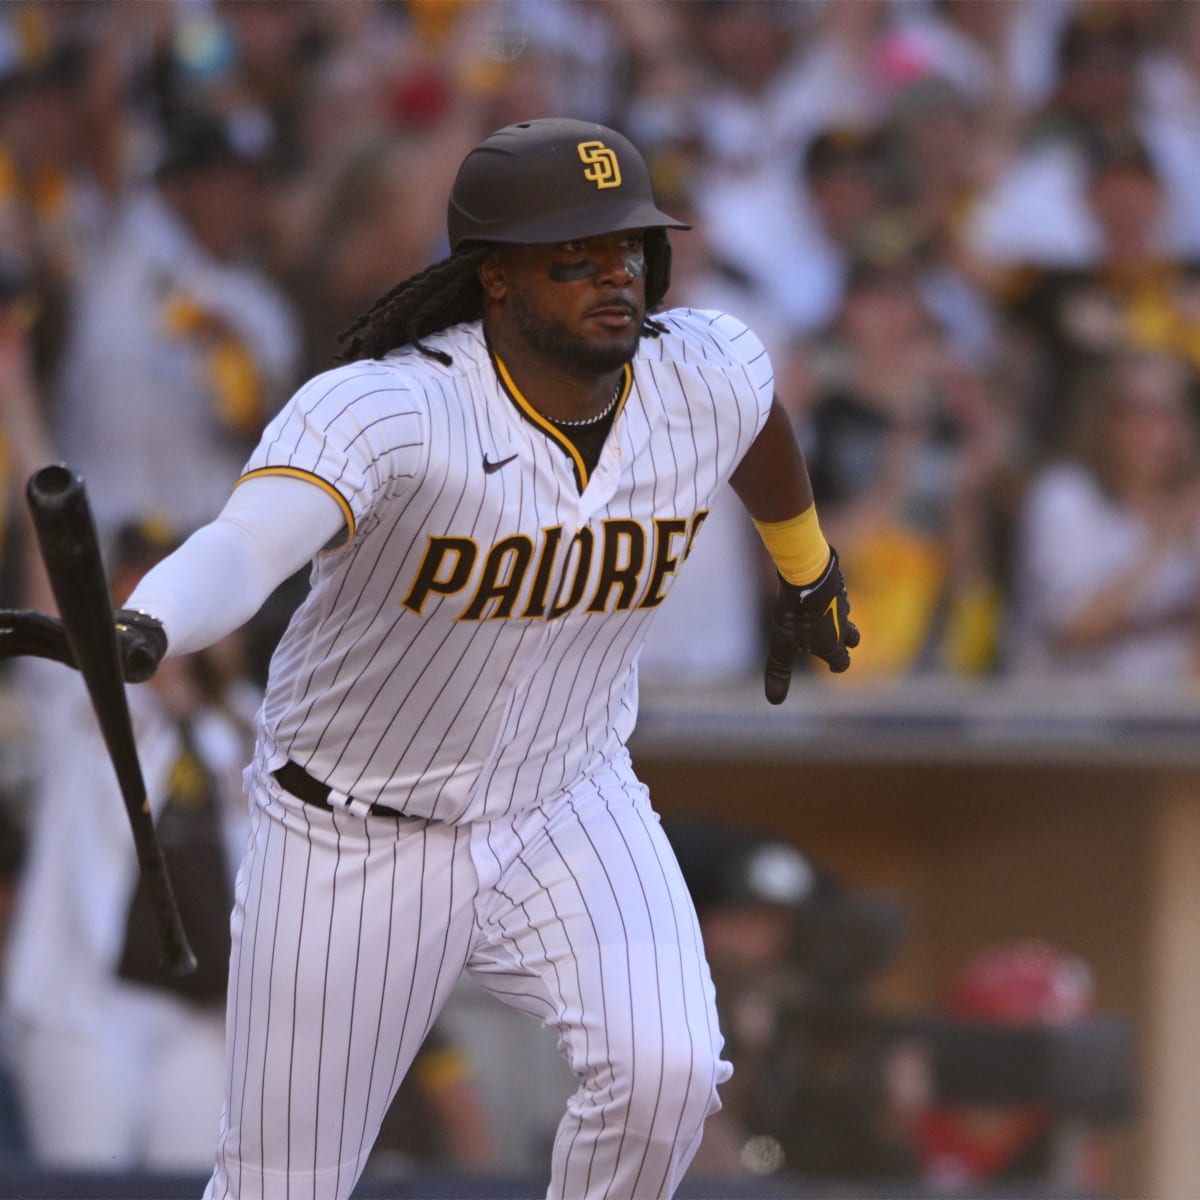 Guardians Josh Bell is getting back to basics as he joins Cleveland